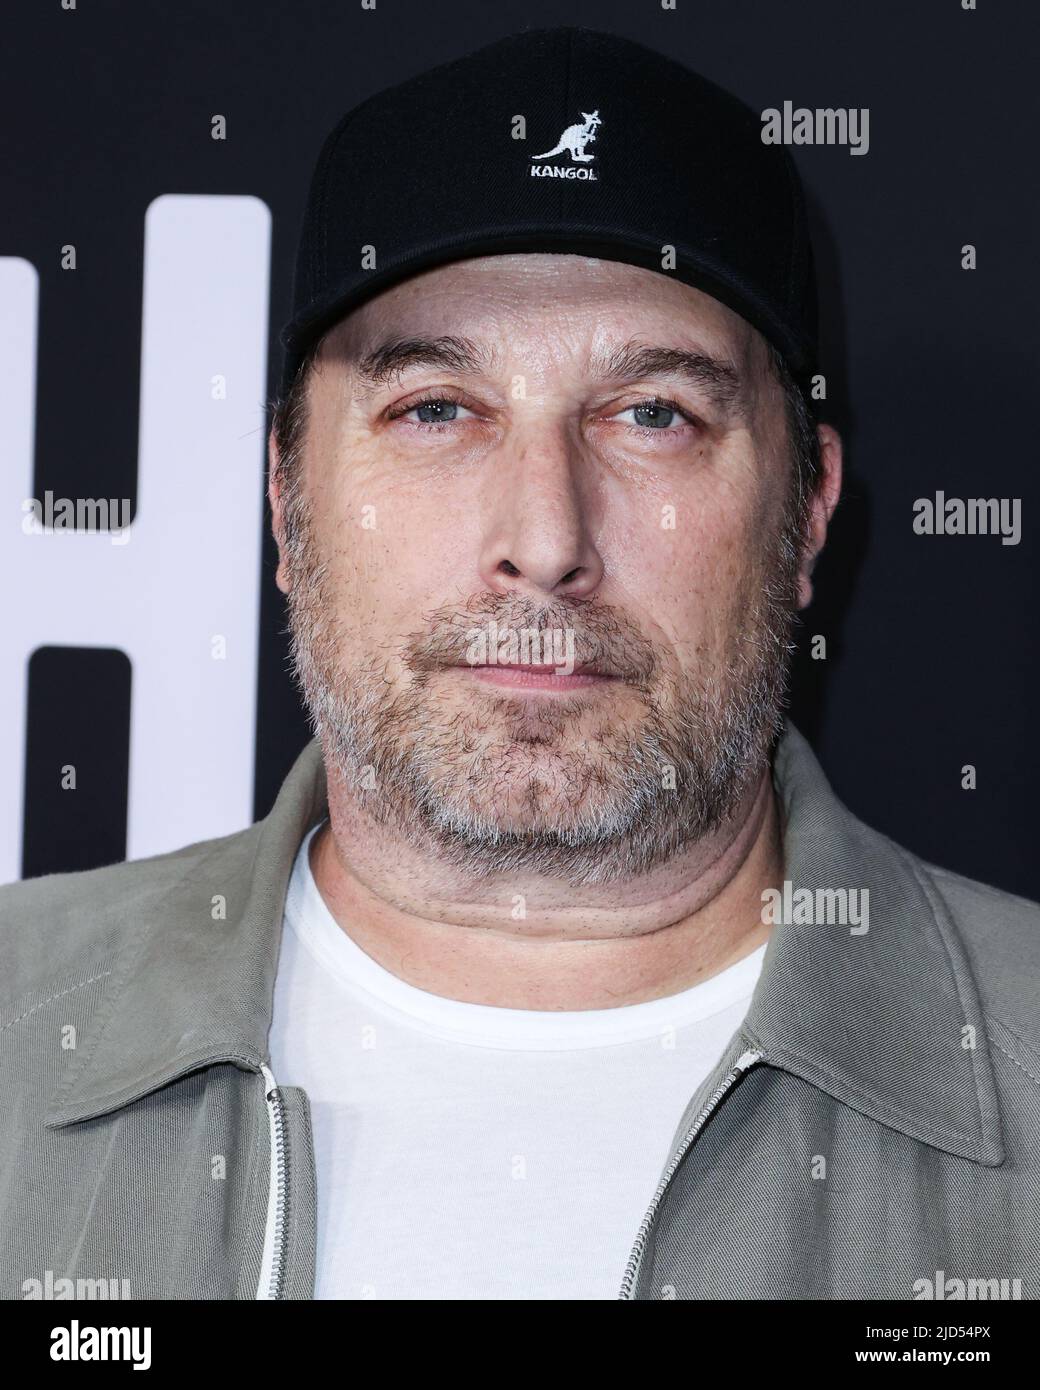 West Hollywood, USA. 17th June, 2022. WEST HOLLYWOOD, LOS ANGELES, CALIFORNIA, USA - JUNE 17: Producer Steve Blackman arrives at the World Premiere Of Netflix's 'The Umbrella Academy' Season 3 held at The London West Hollywood at Beverly Hills on June 17, 2022 in West Hollywood, Los Angeles, California, USA. (Photo by Xavier Collin/Image Press Agency) Credit: Image Press Agency/Alamy Live News Stock Photo